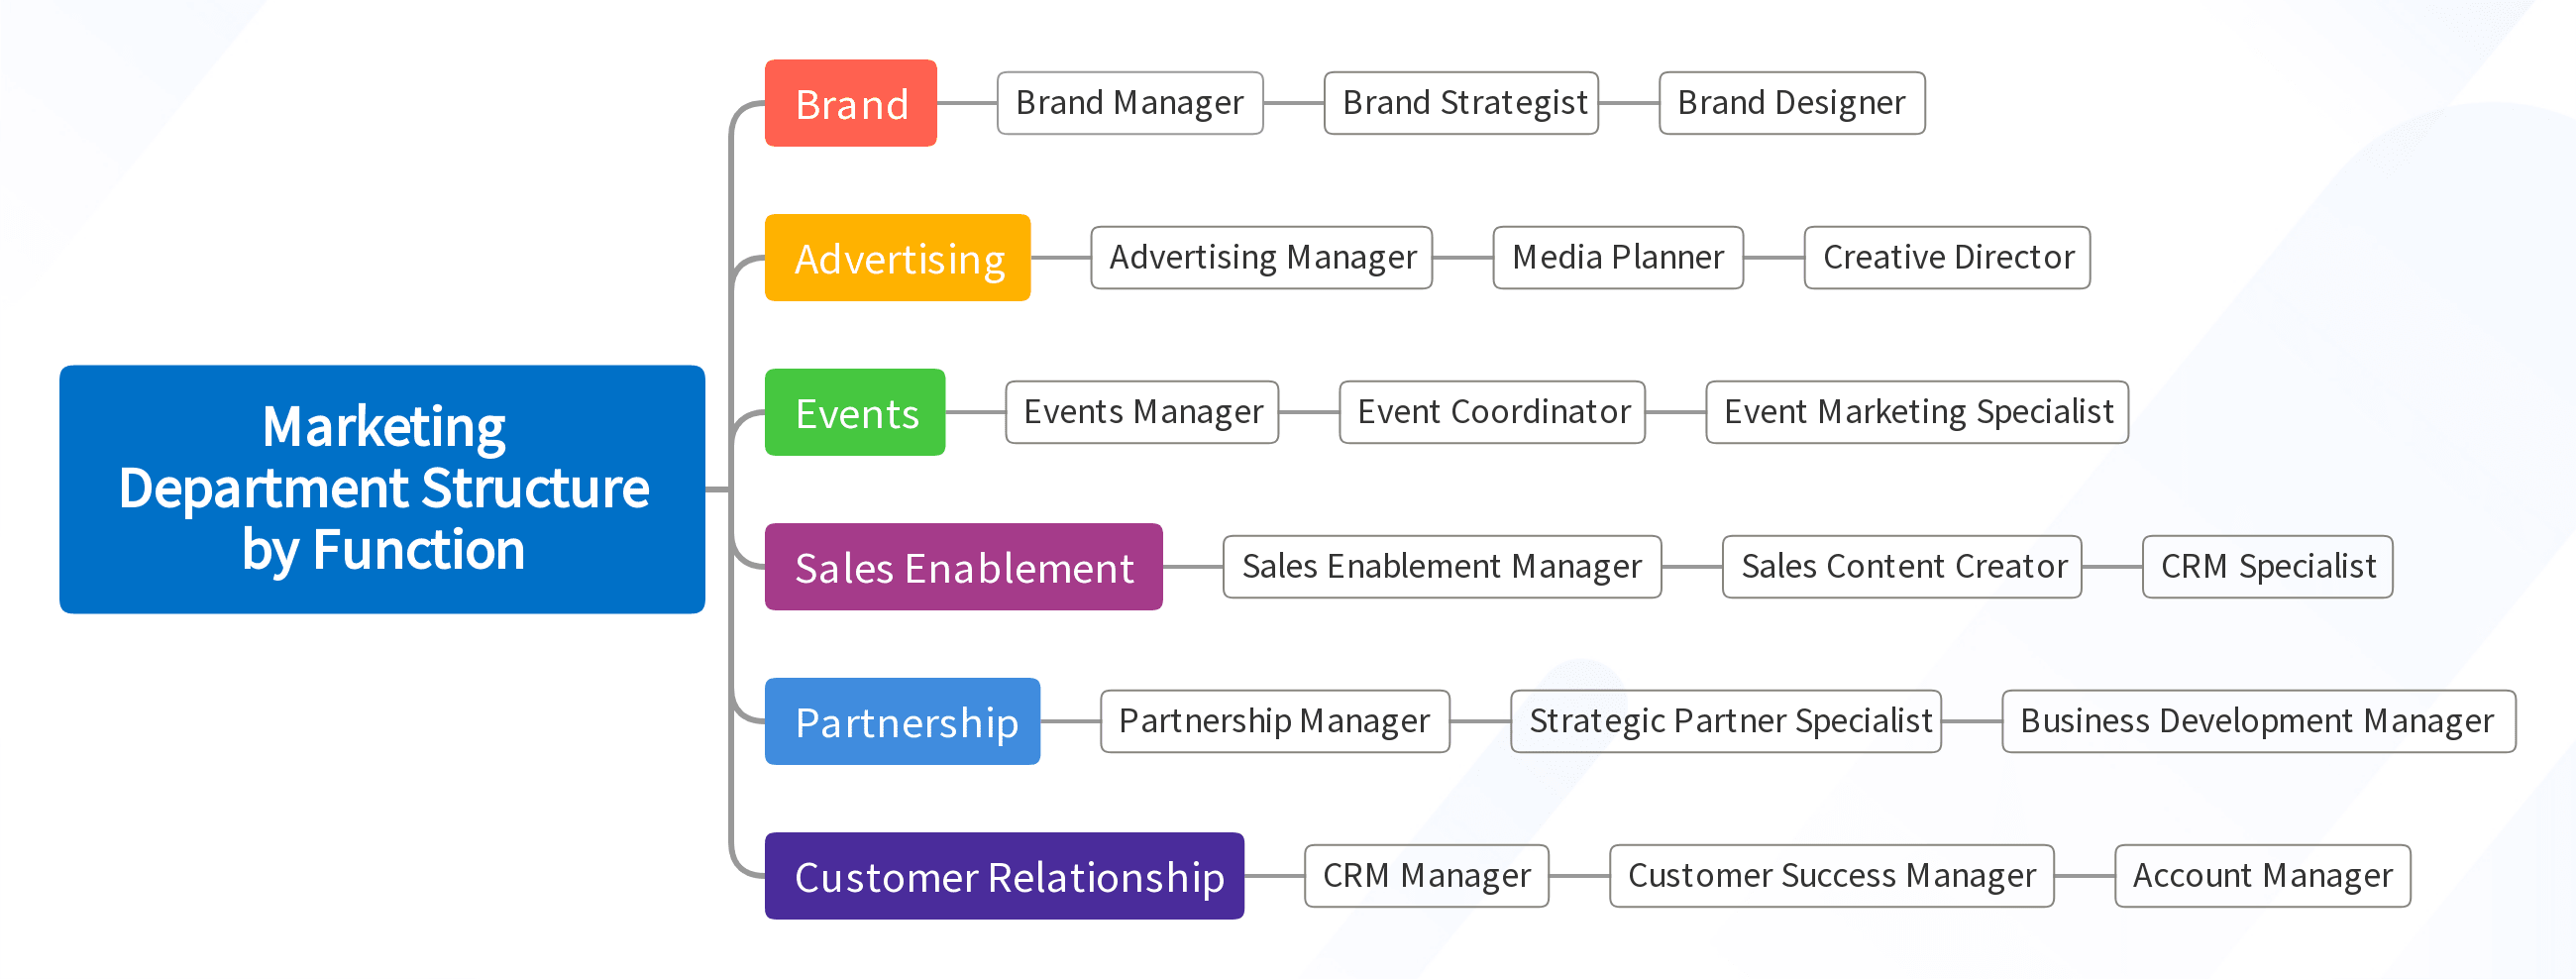 Marketing Department Structure by Function